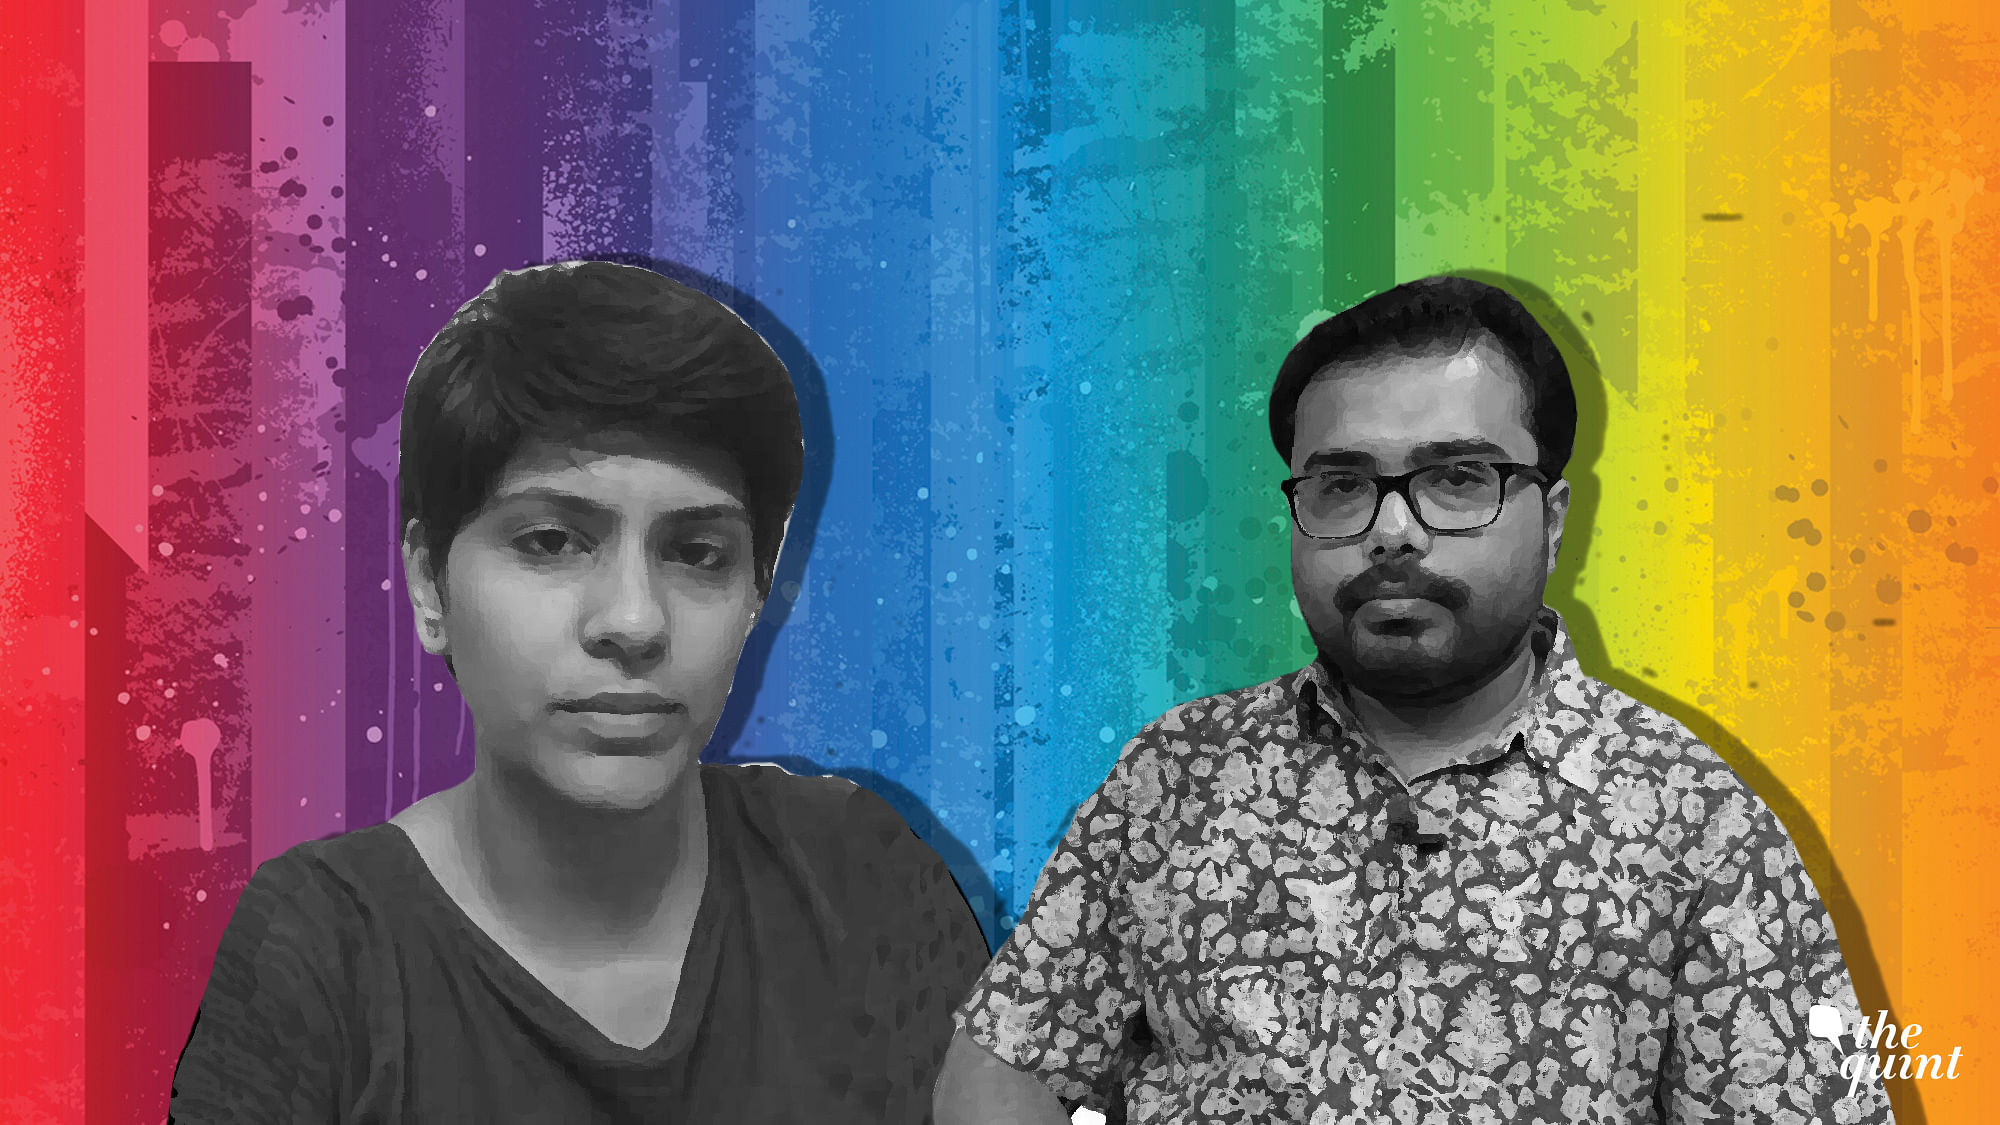 20 IIT students move the Supreme Court seeking equality as they challenge the constitutional validity of section 377.